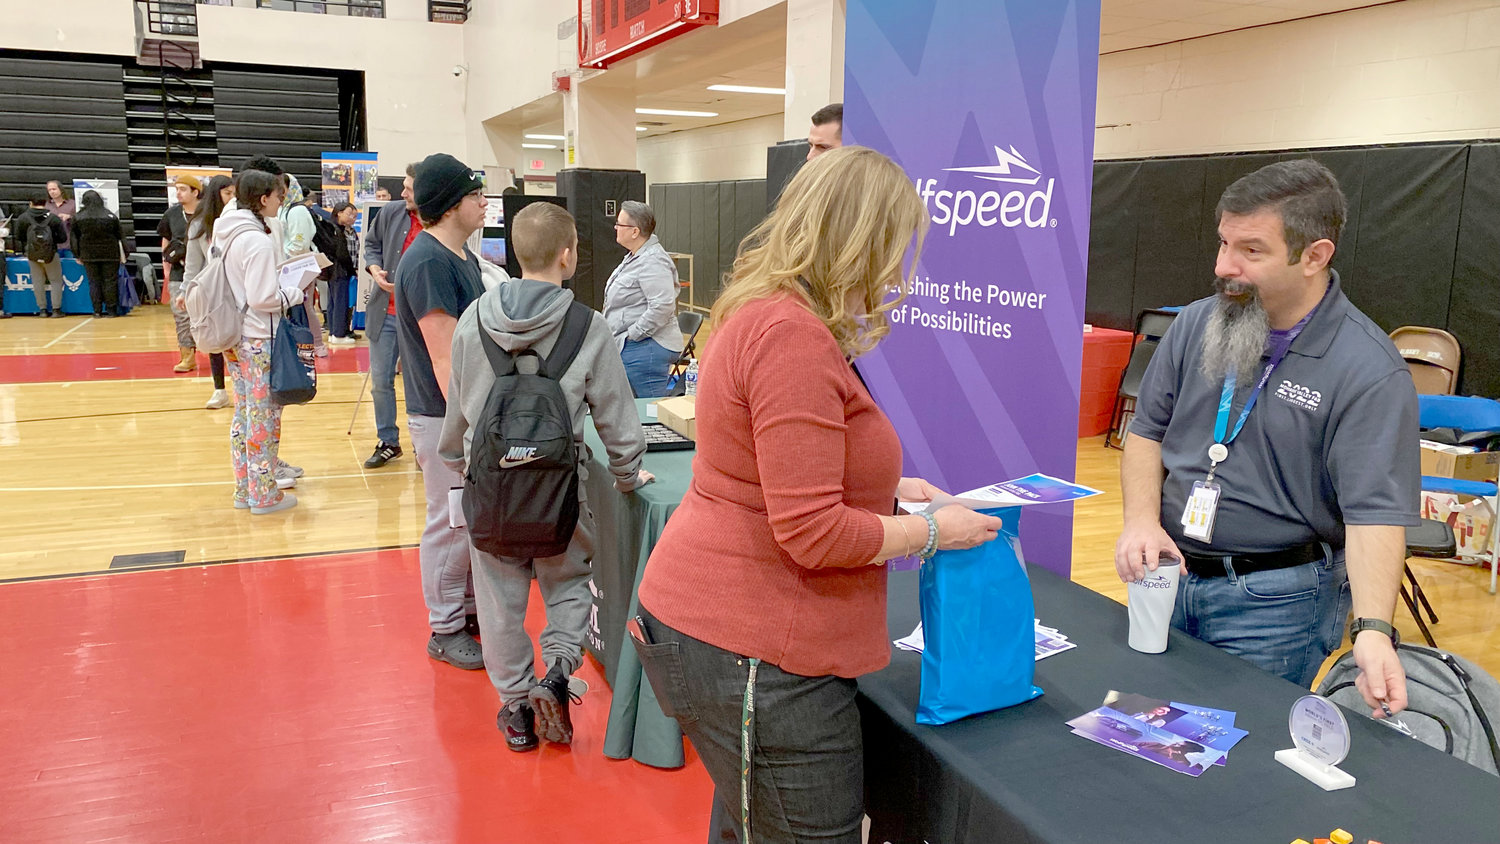 Students at Thomas R. Proctor High School in Utica talk with exhibitors about their job fields during Career Day on Thursday, Feb. 16. The event helps students identify potential future paths and learn about the businesses and industries in Utica and the Mohawk Valley.